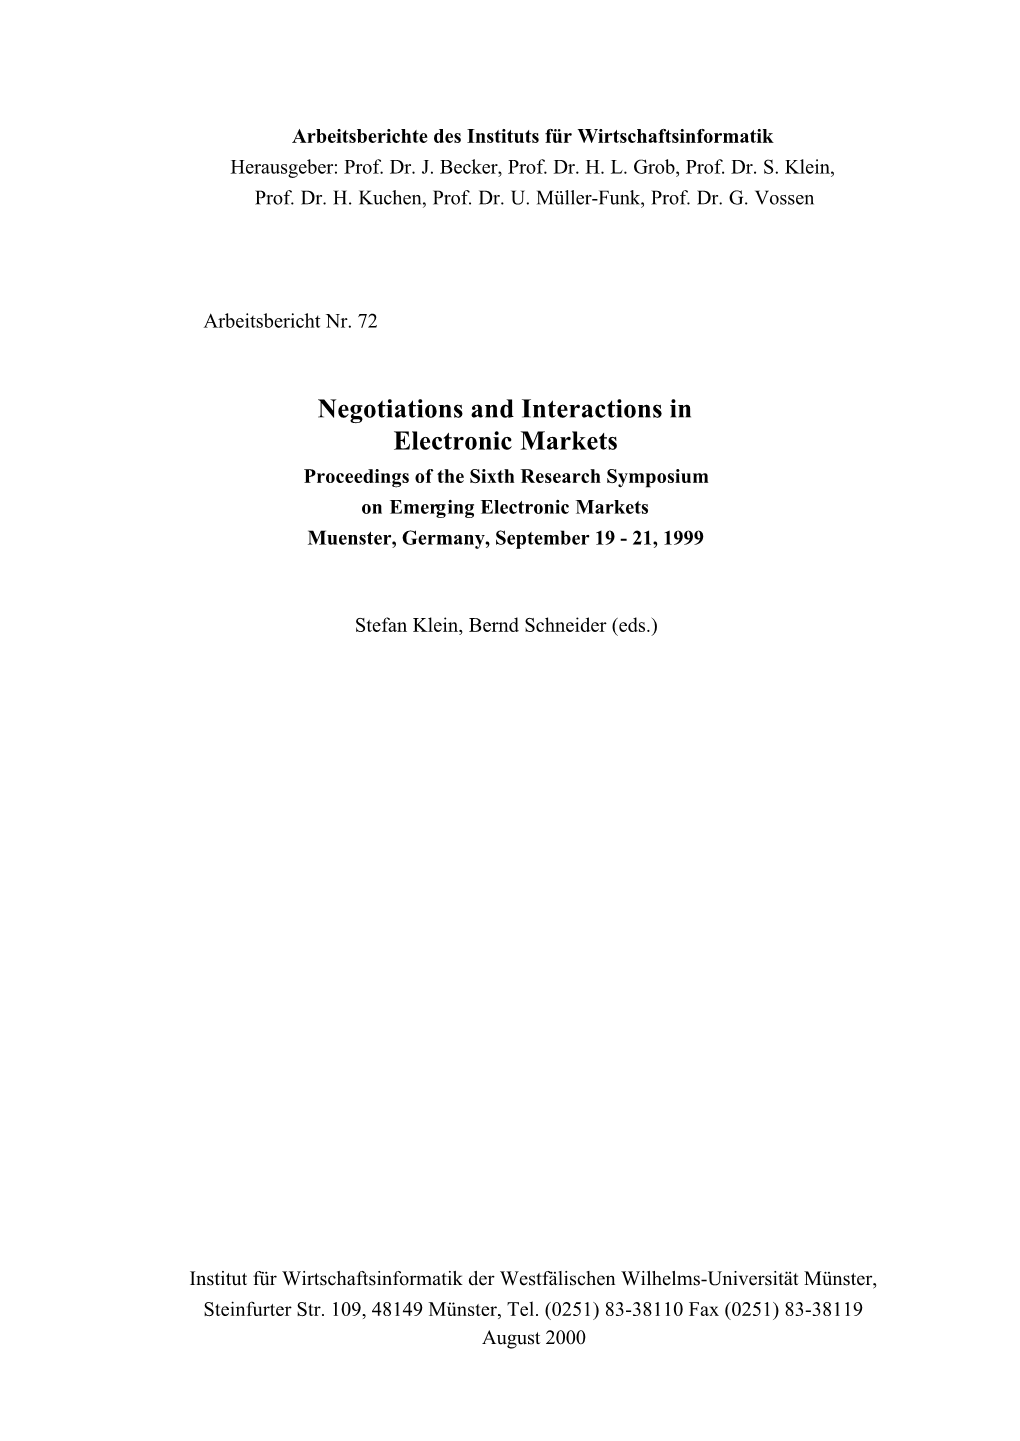 Negotiations and Interactions in Electronic Markets